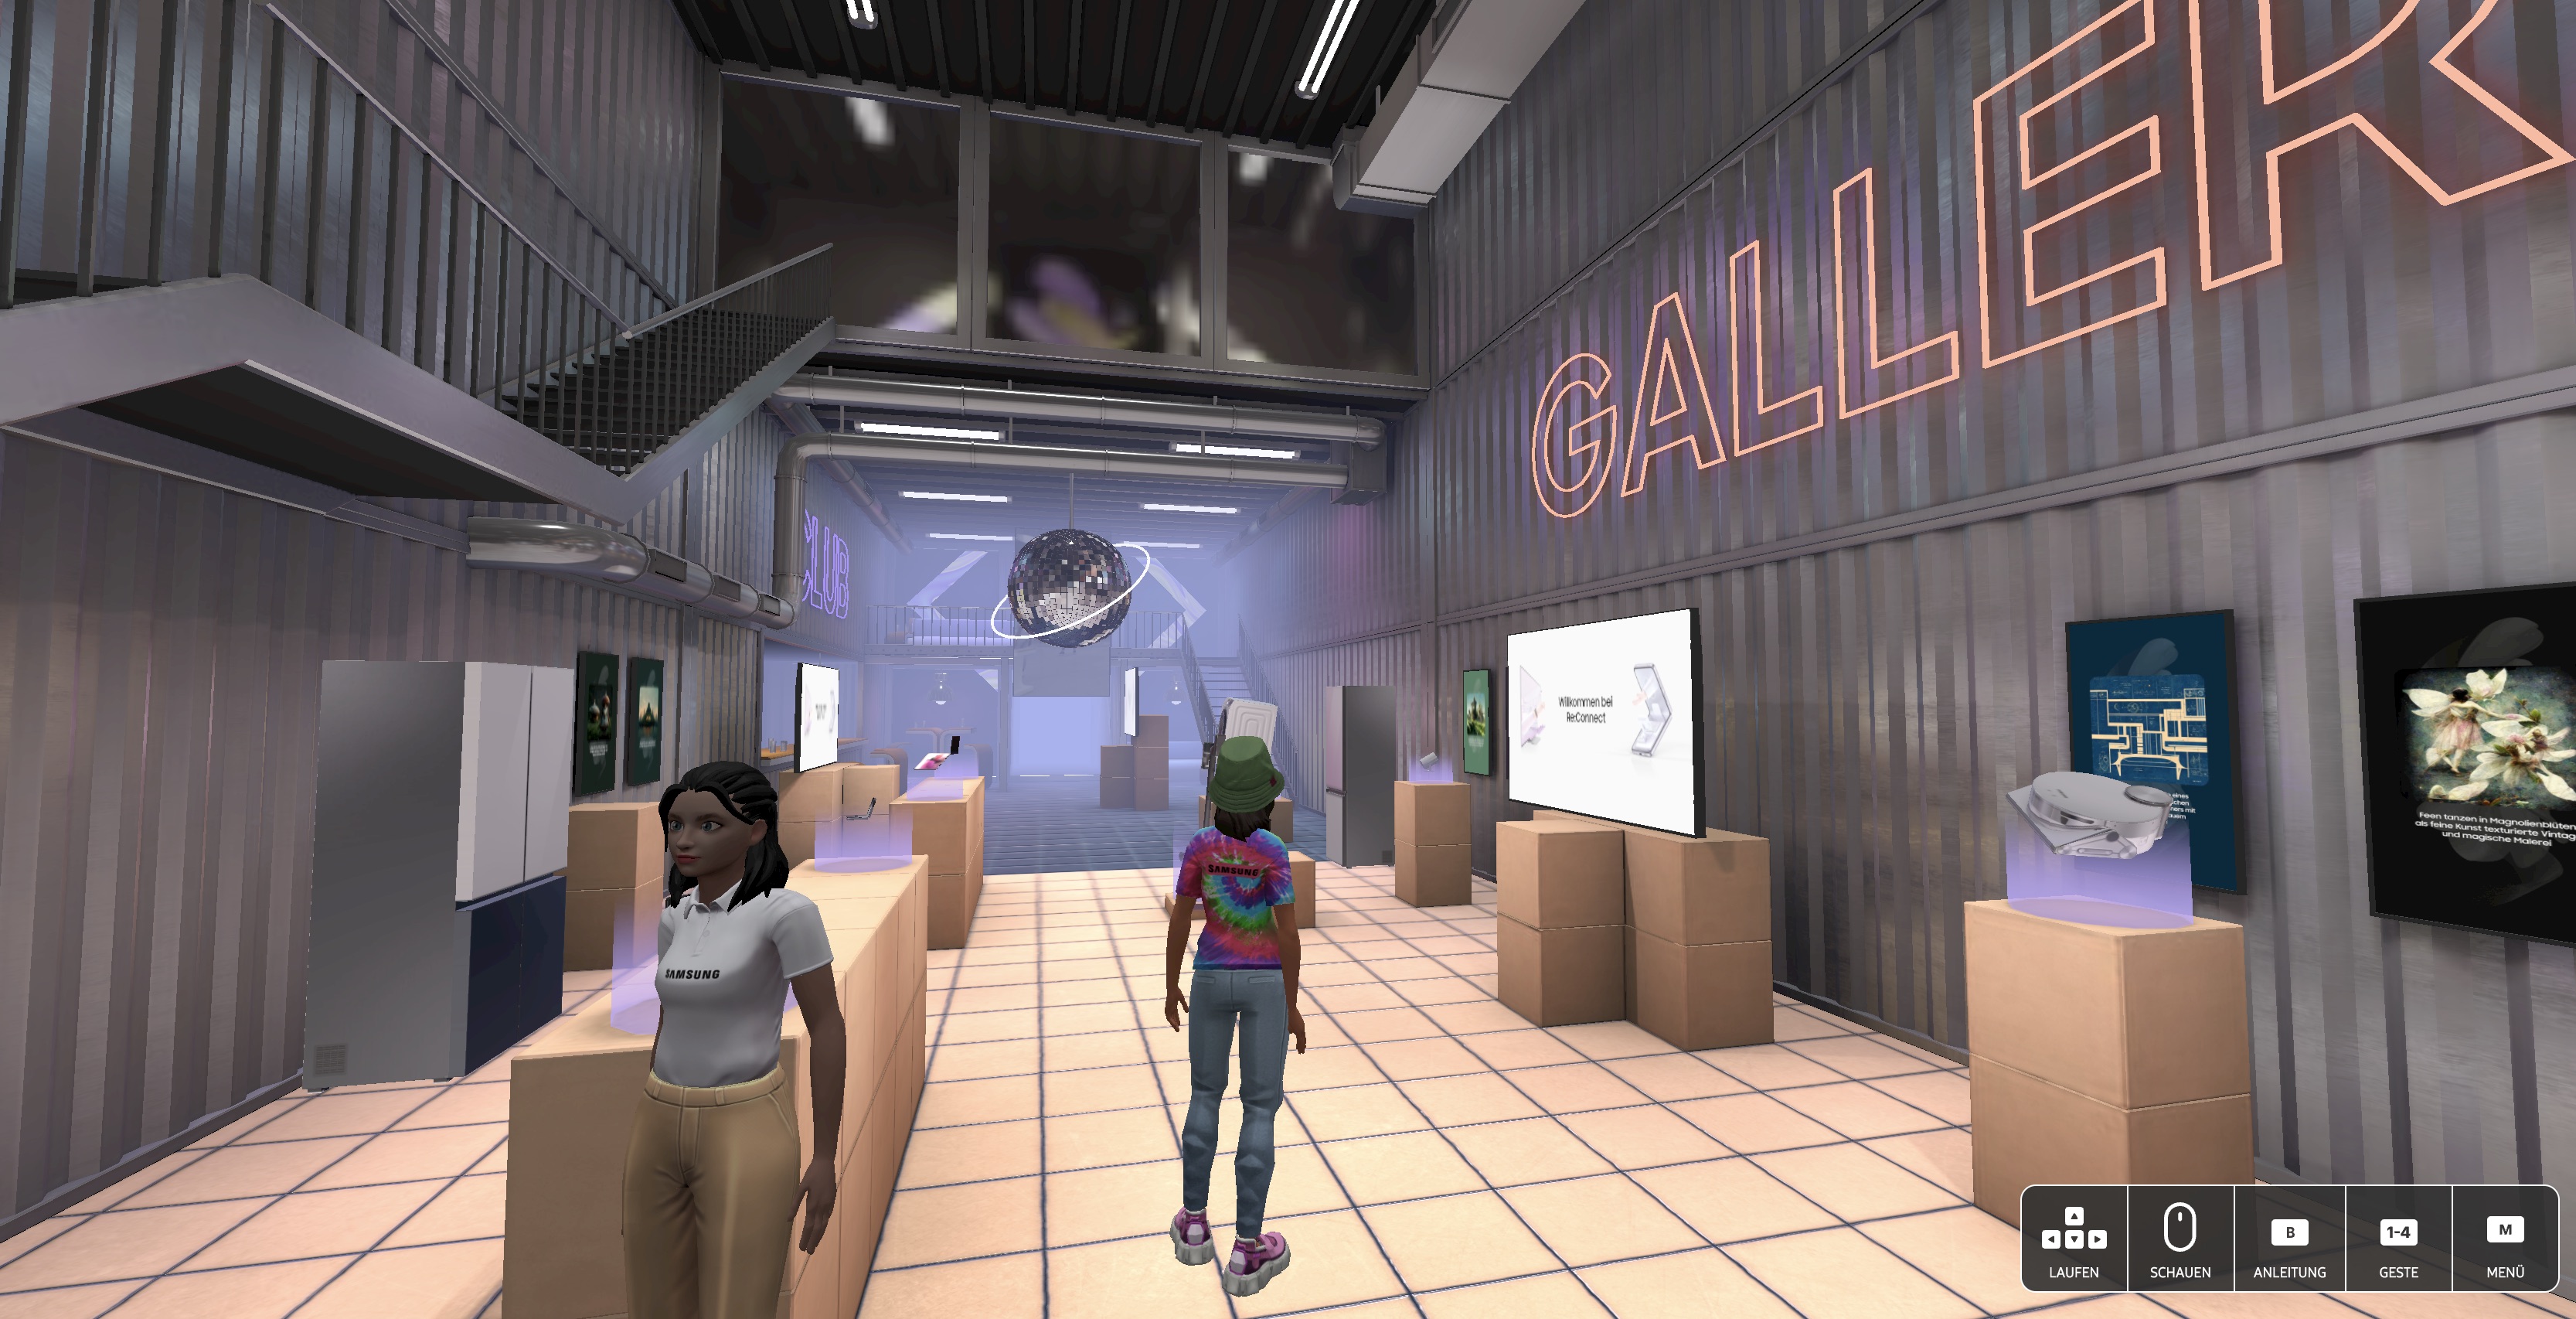 Recreation of the Popup space & 3D Models of the new Products to explore